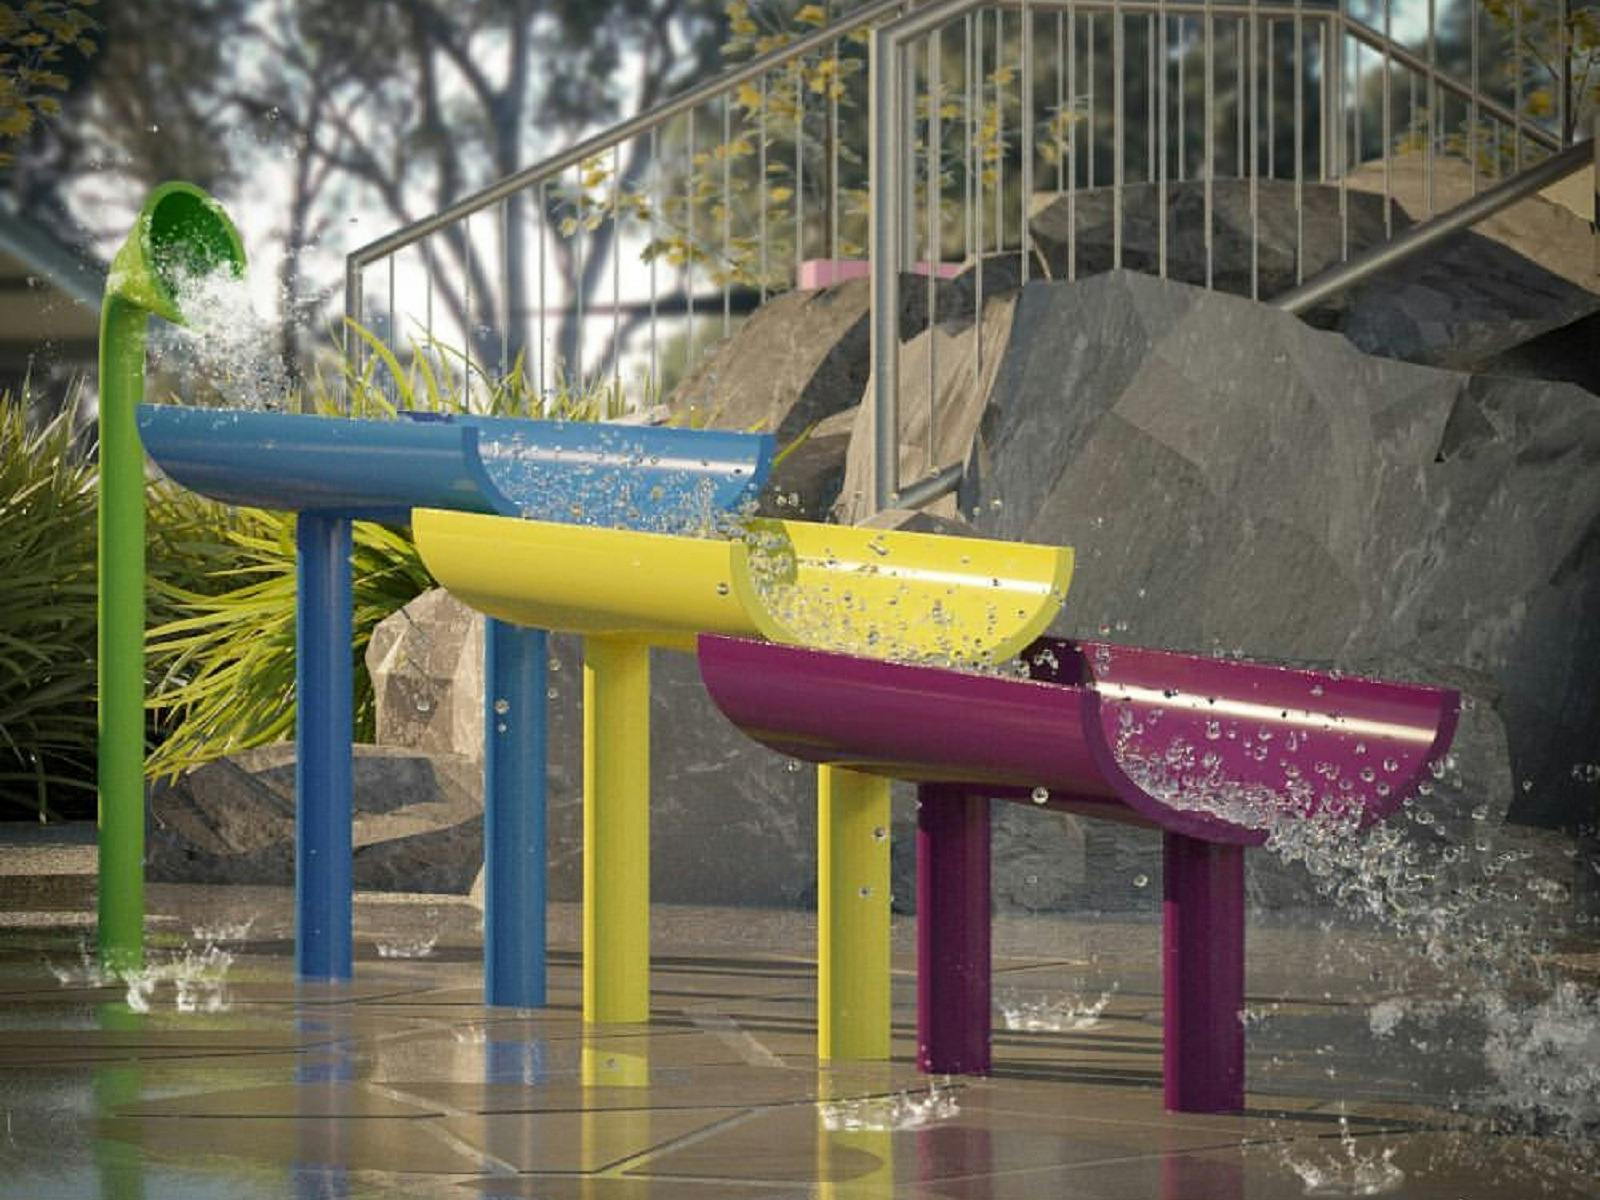 Water flowing like a waterfall down colourful splash park equipment.